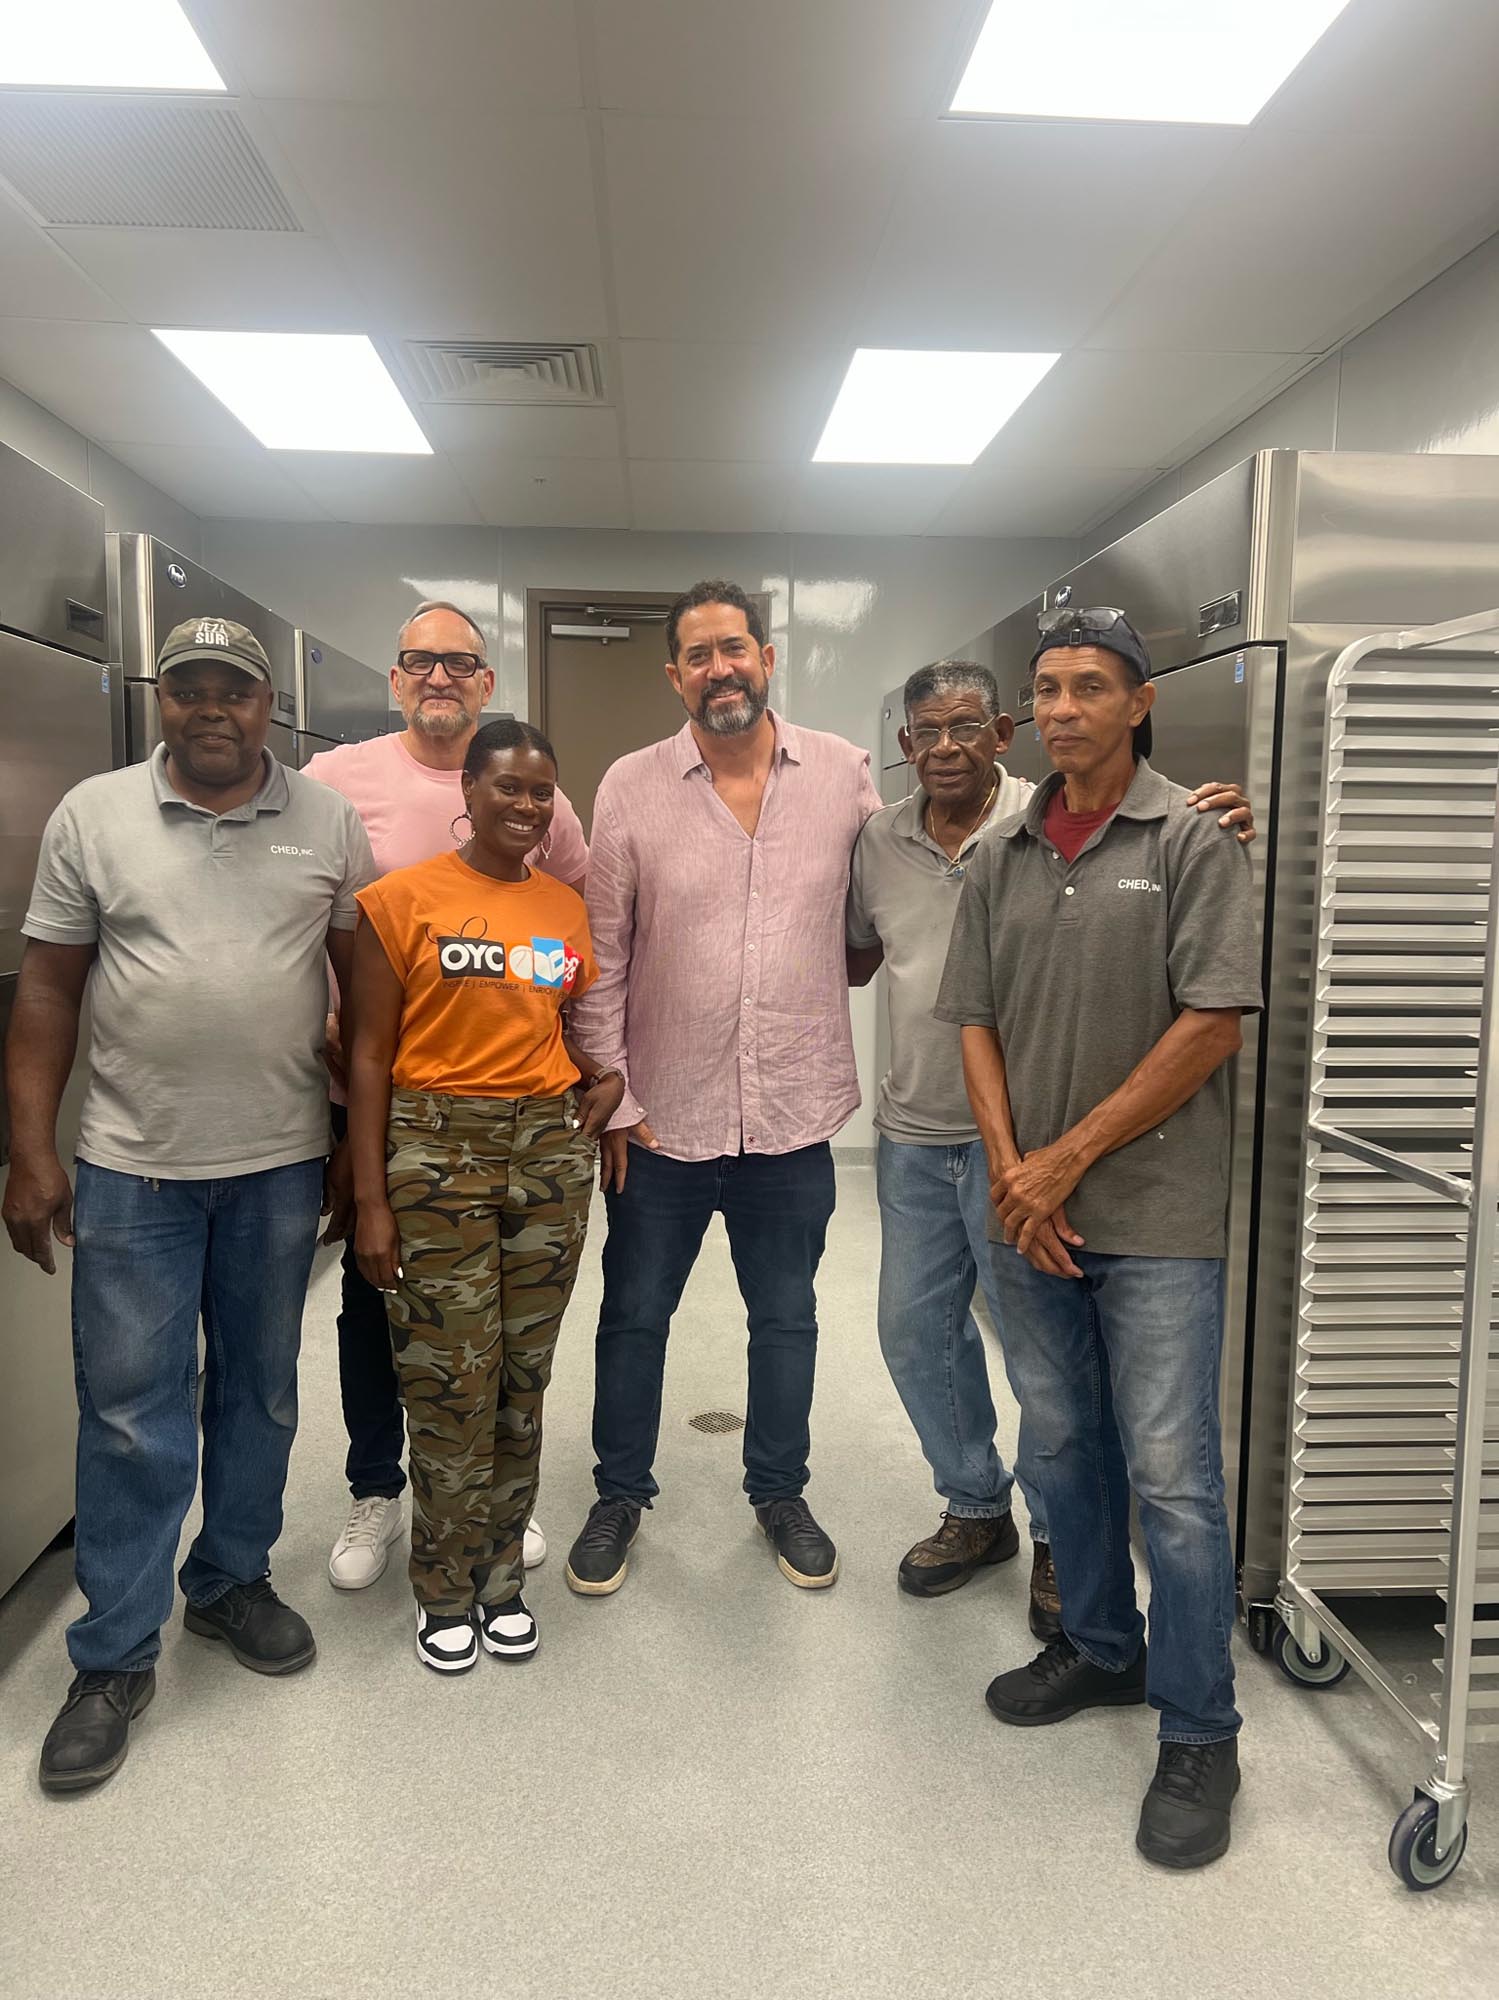 Mark Cesar of C&T Design & Equipment Company donated new kitchen equipment to the OYC facility